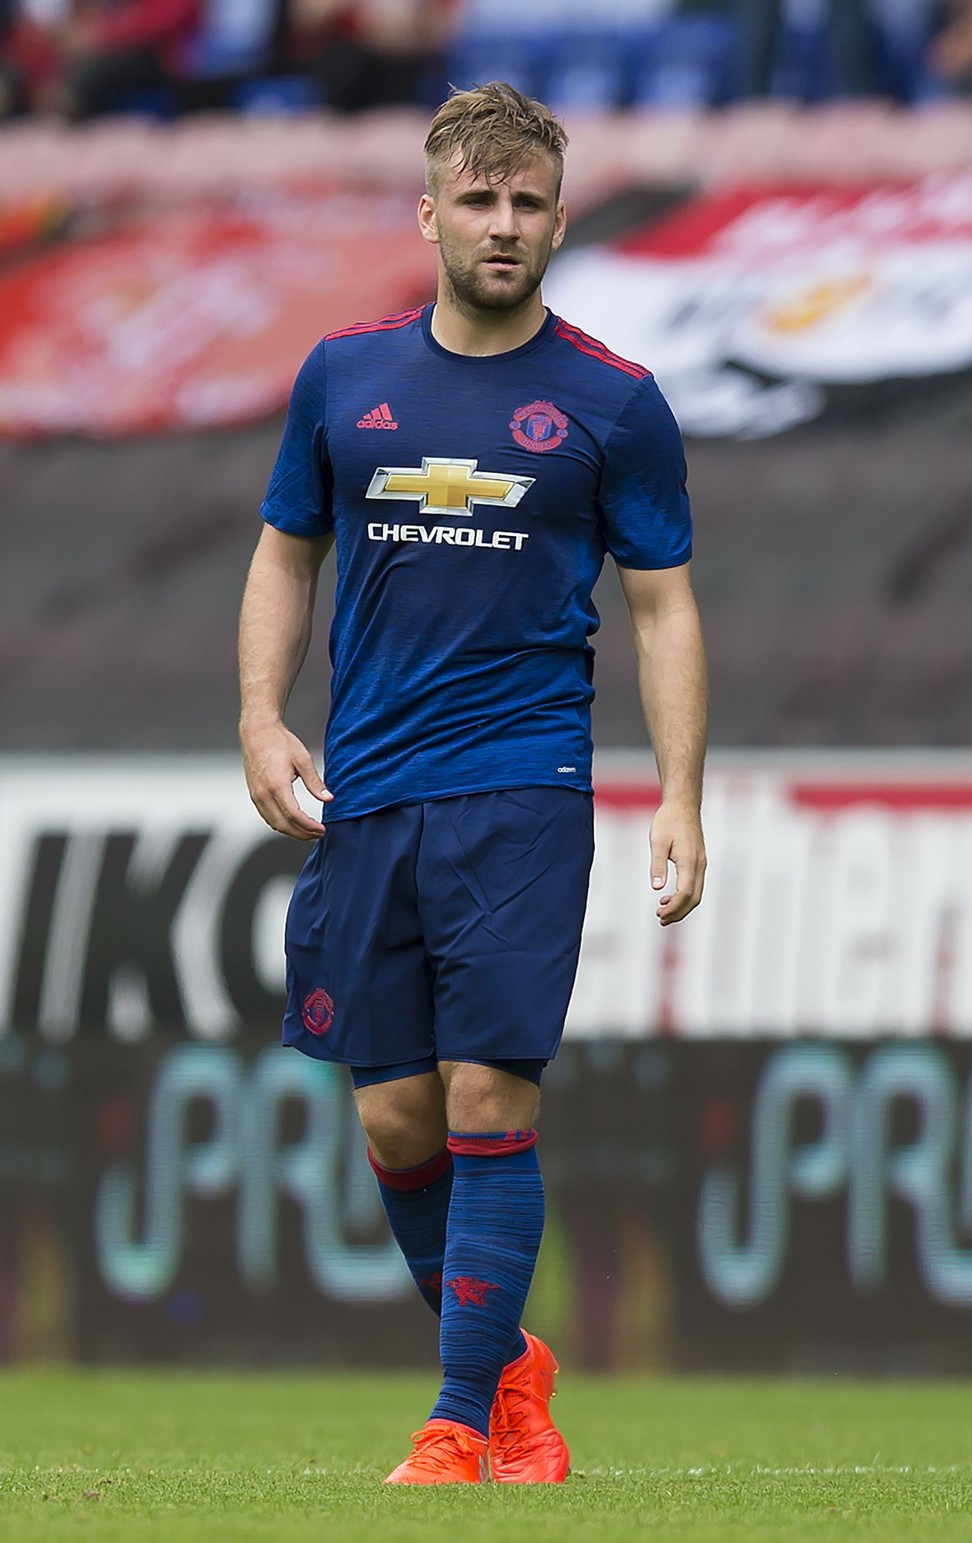 Luke Shaw, pictured during a preseason football against Wigan Athletic in July 2016, has had his fitness questioned by two Manchester United managers. Photo: AFP